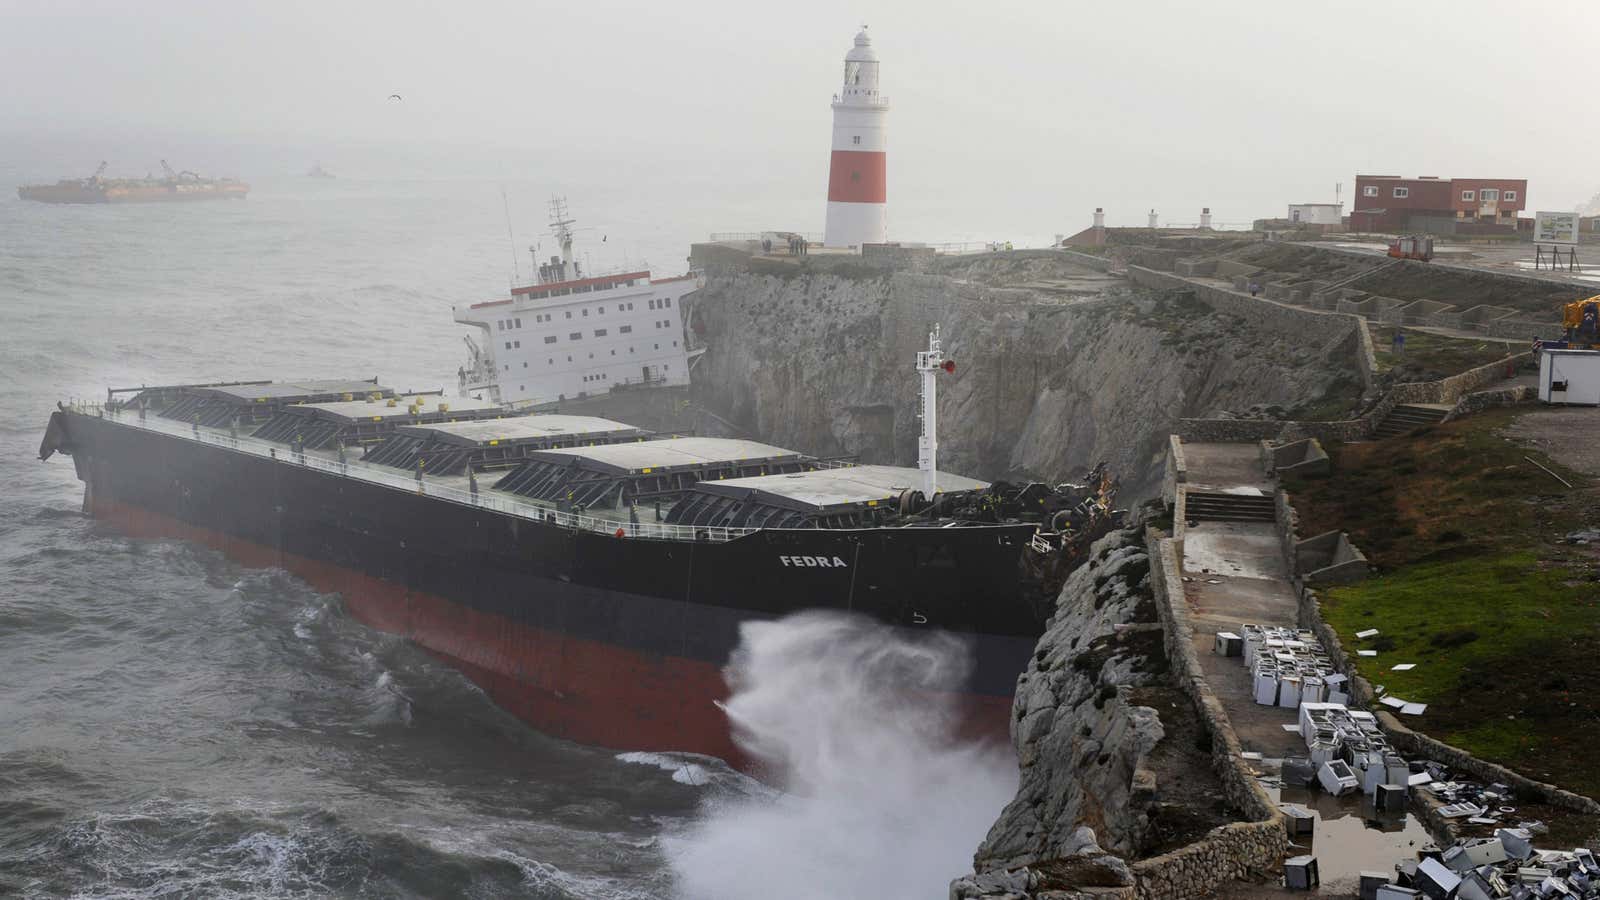 The fiscal cliff could be disastrous for the shipping industry and the global economy that it feeds.